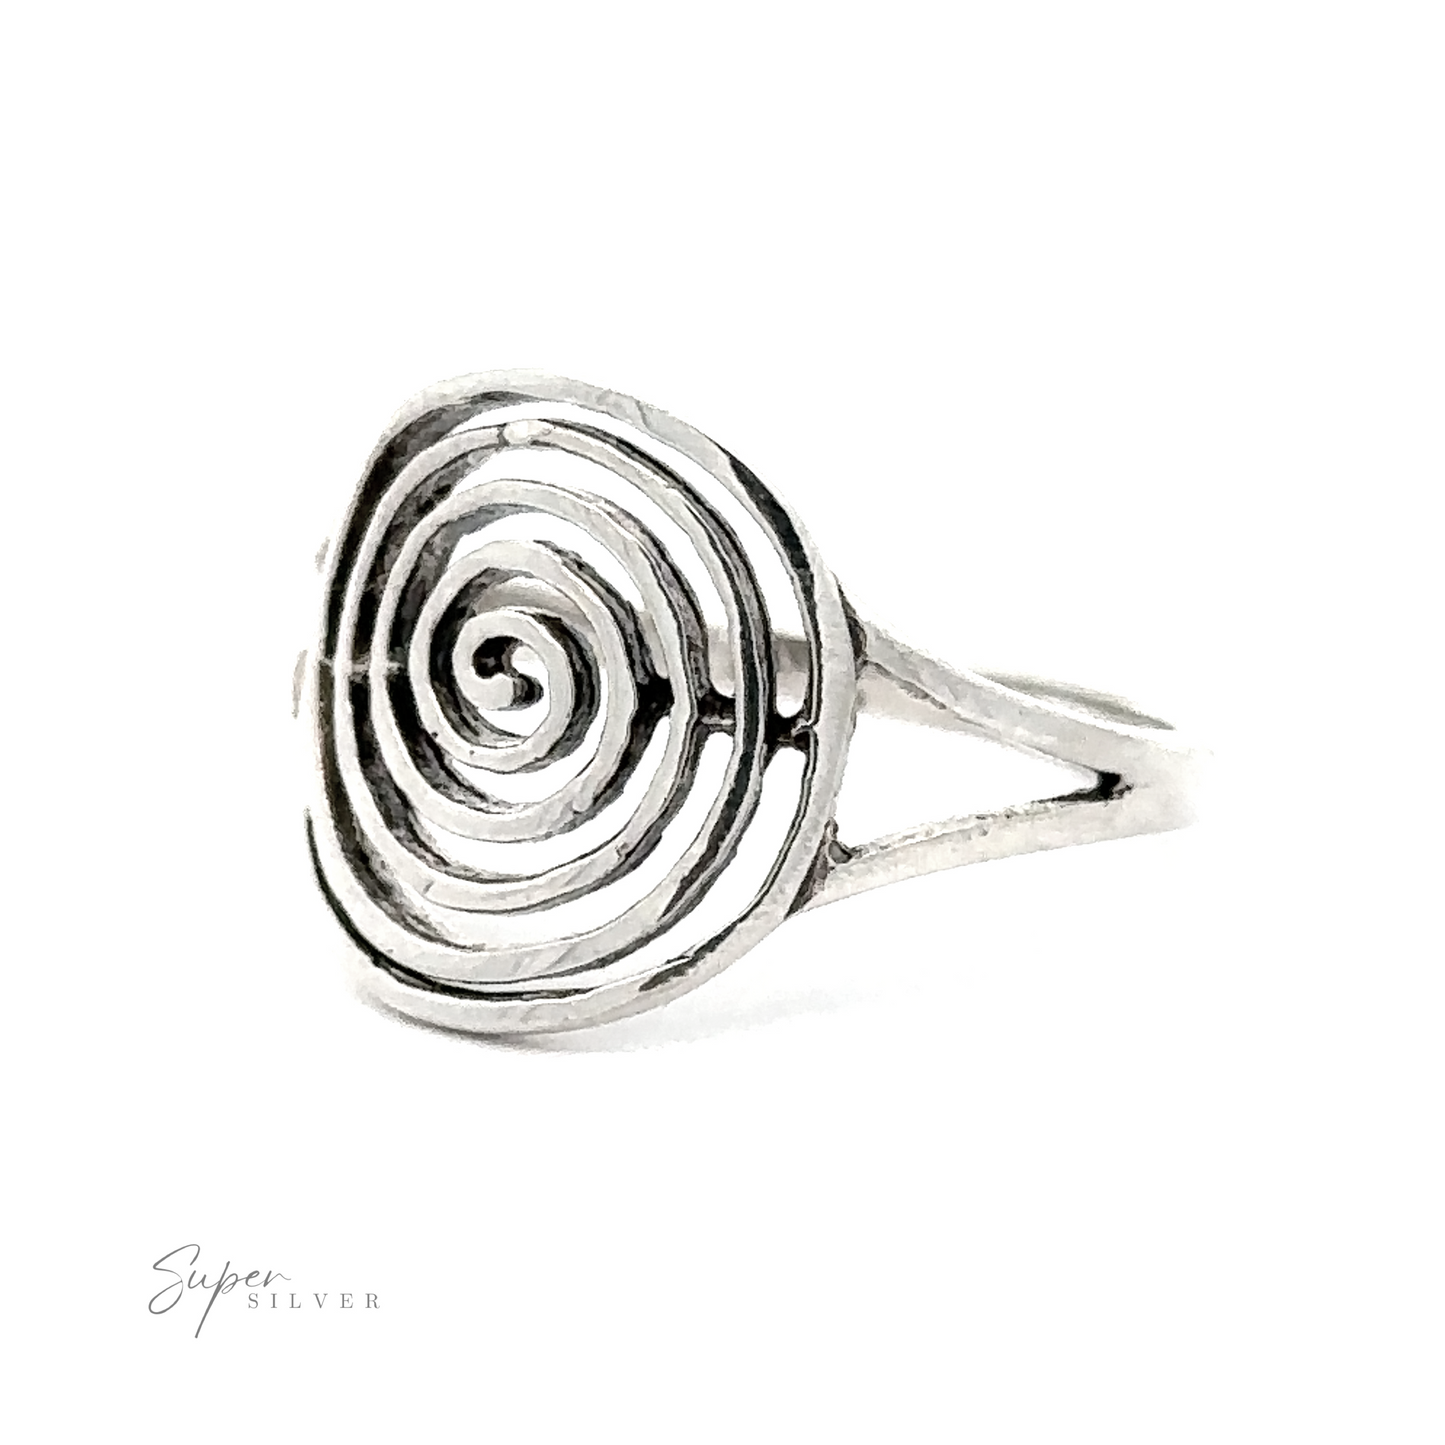 An oxidized spiral ring with a sterling silver design.